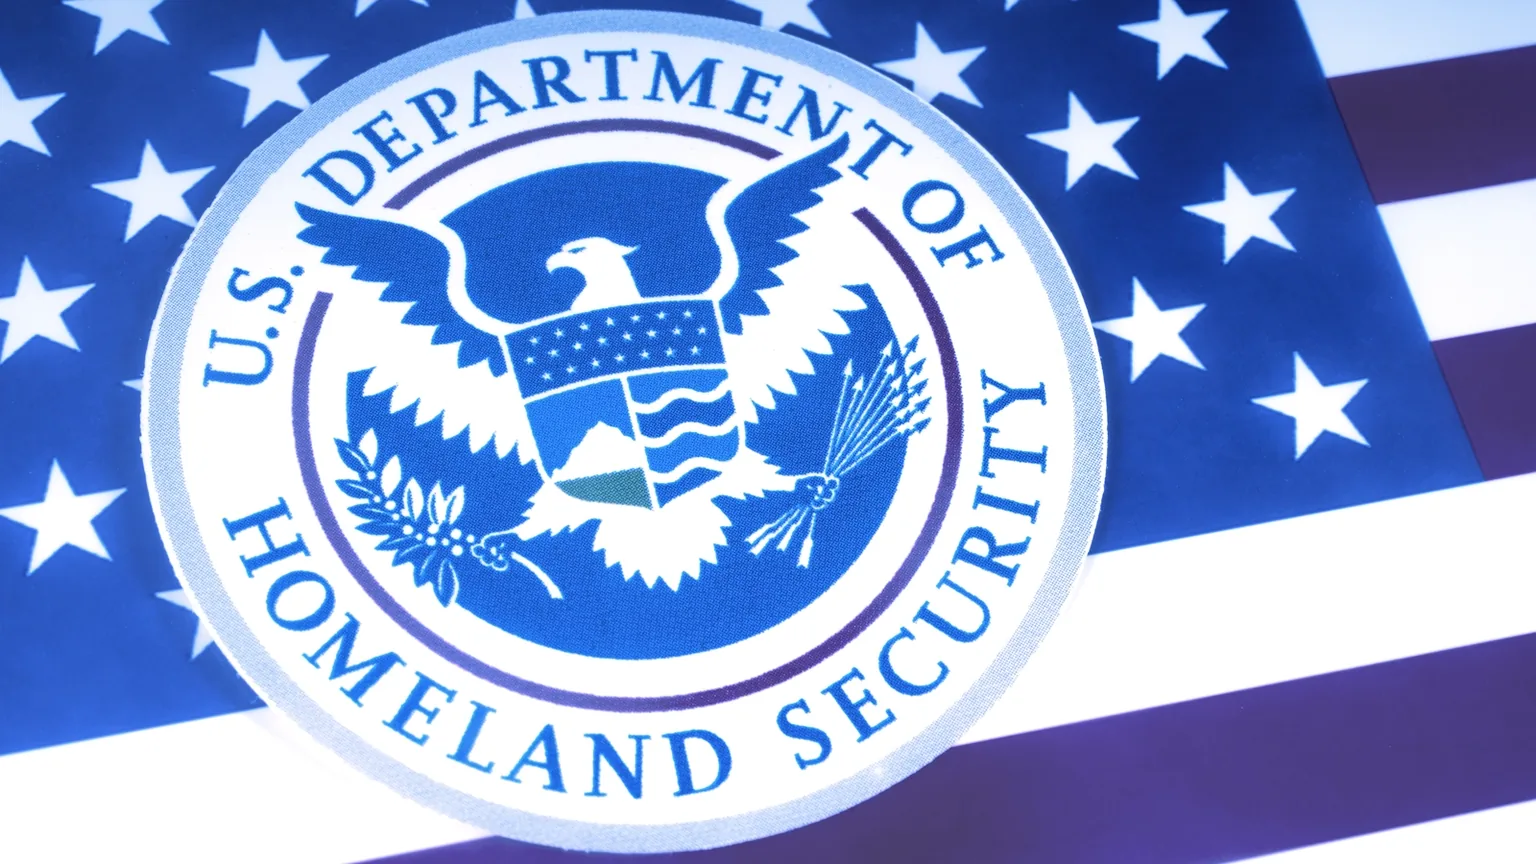 The US Department of Homeland Security. Image: Shutterstock